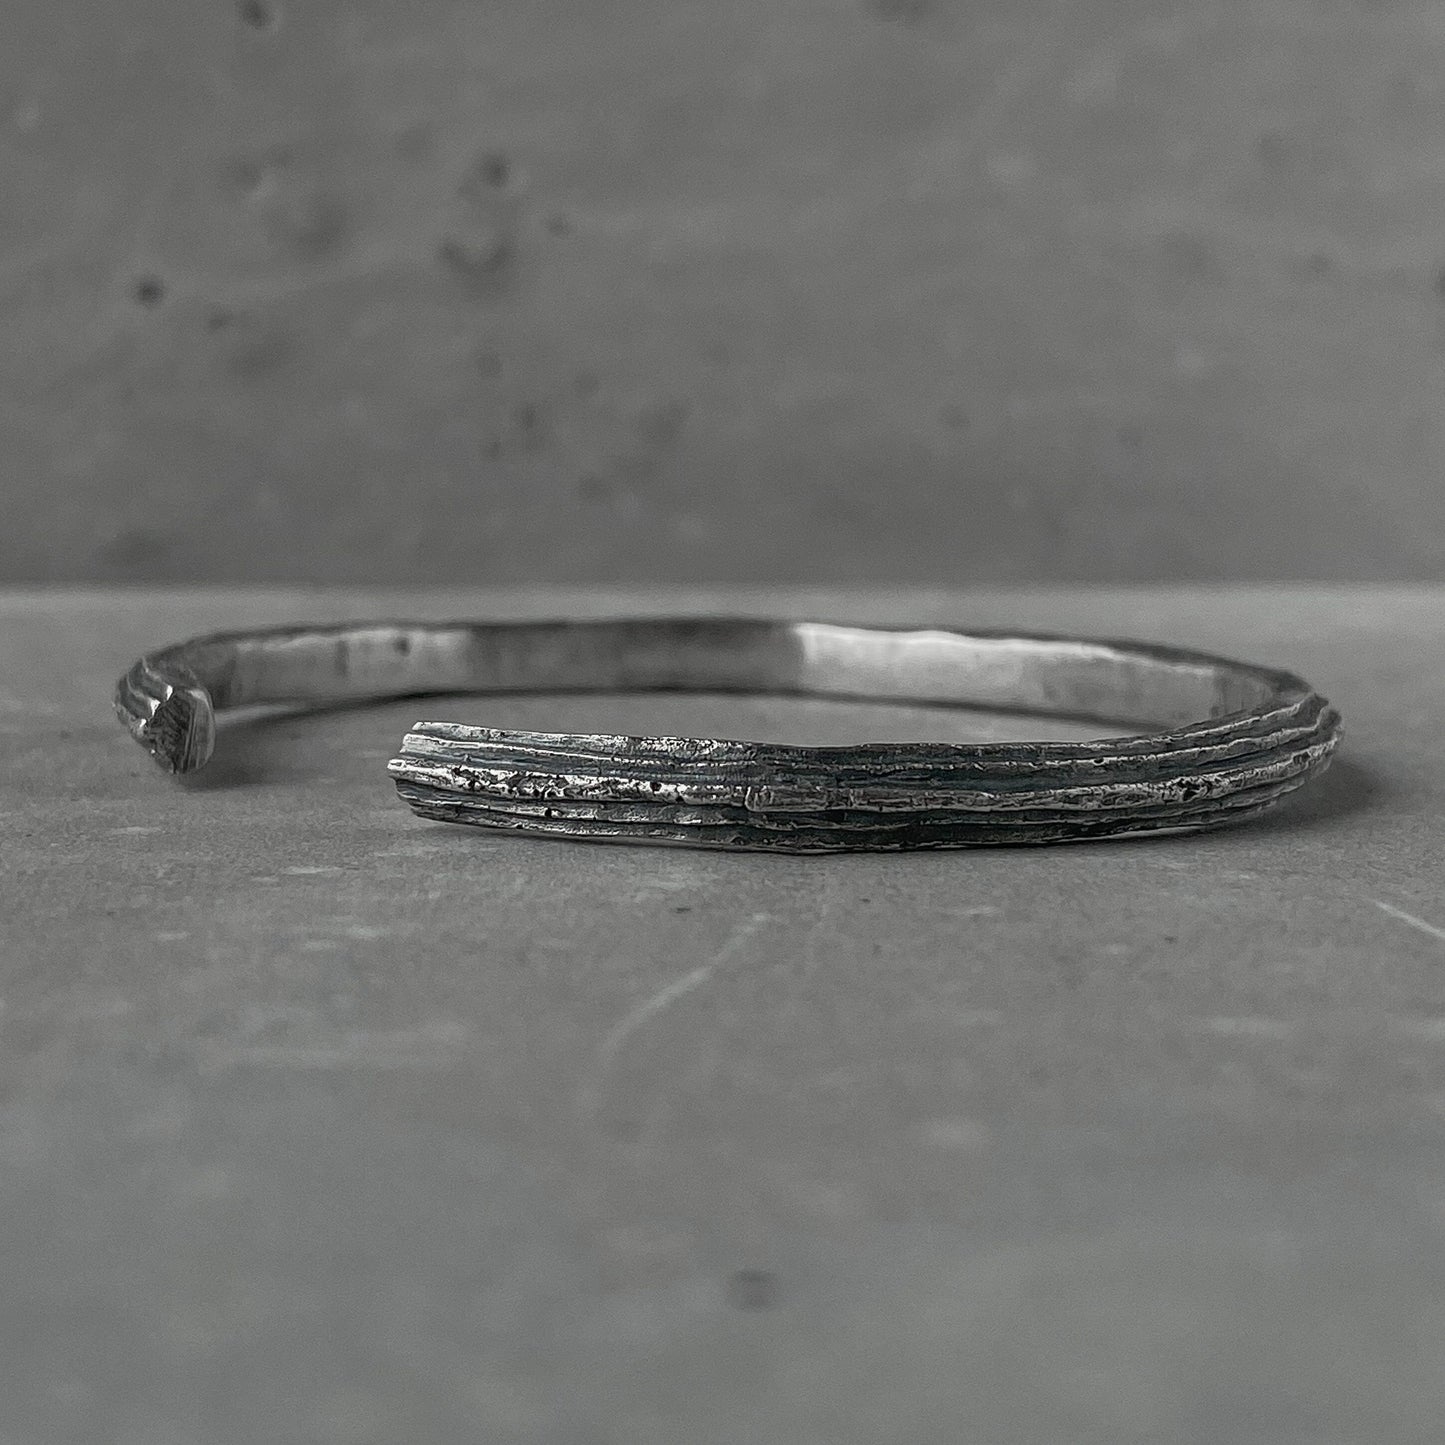 Orbit bangle- thin silver cuff bracelet with unusual hancrafted texture Bracelets Project50g 